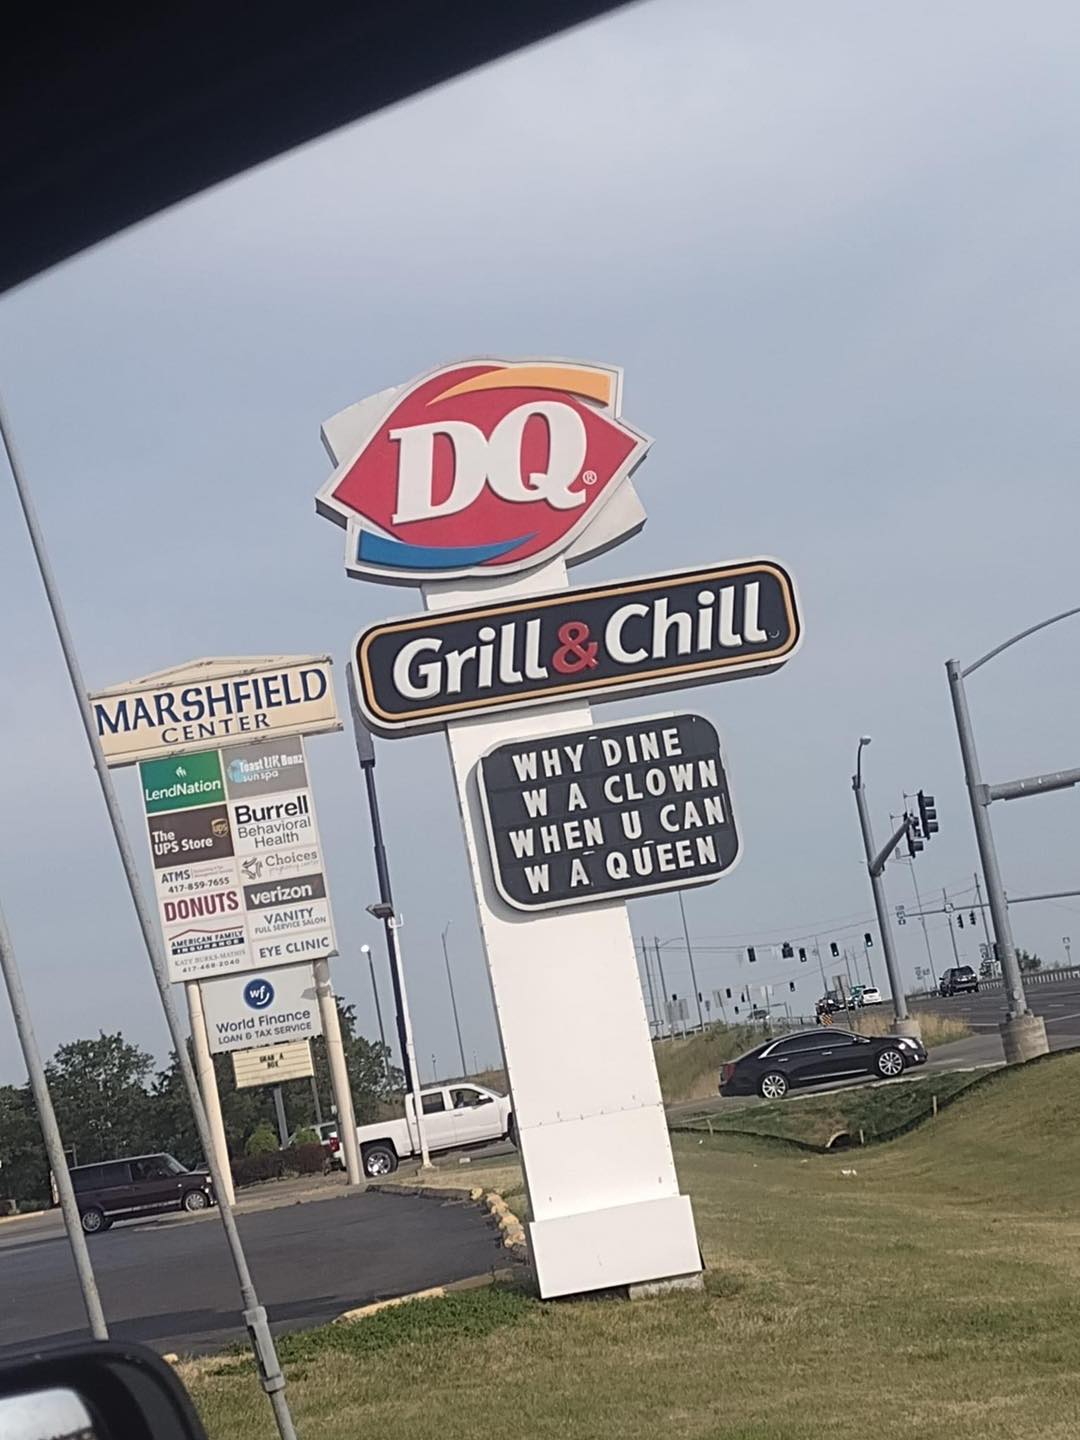 Fast food sign war - dairy queen - Marshfield Grill & Chill Toast Uk Banz LendNationsunspa The Ups Store Burrell Behavioral Health ces Atms 4178597655 Donuts verizon Vanity Full Service Salon Eye Clinic Family American Co Thouder Katy Burks Matos 41746820